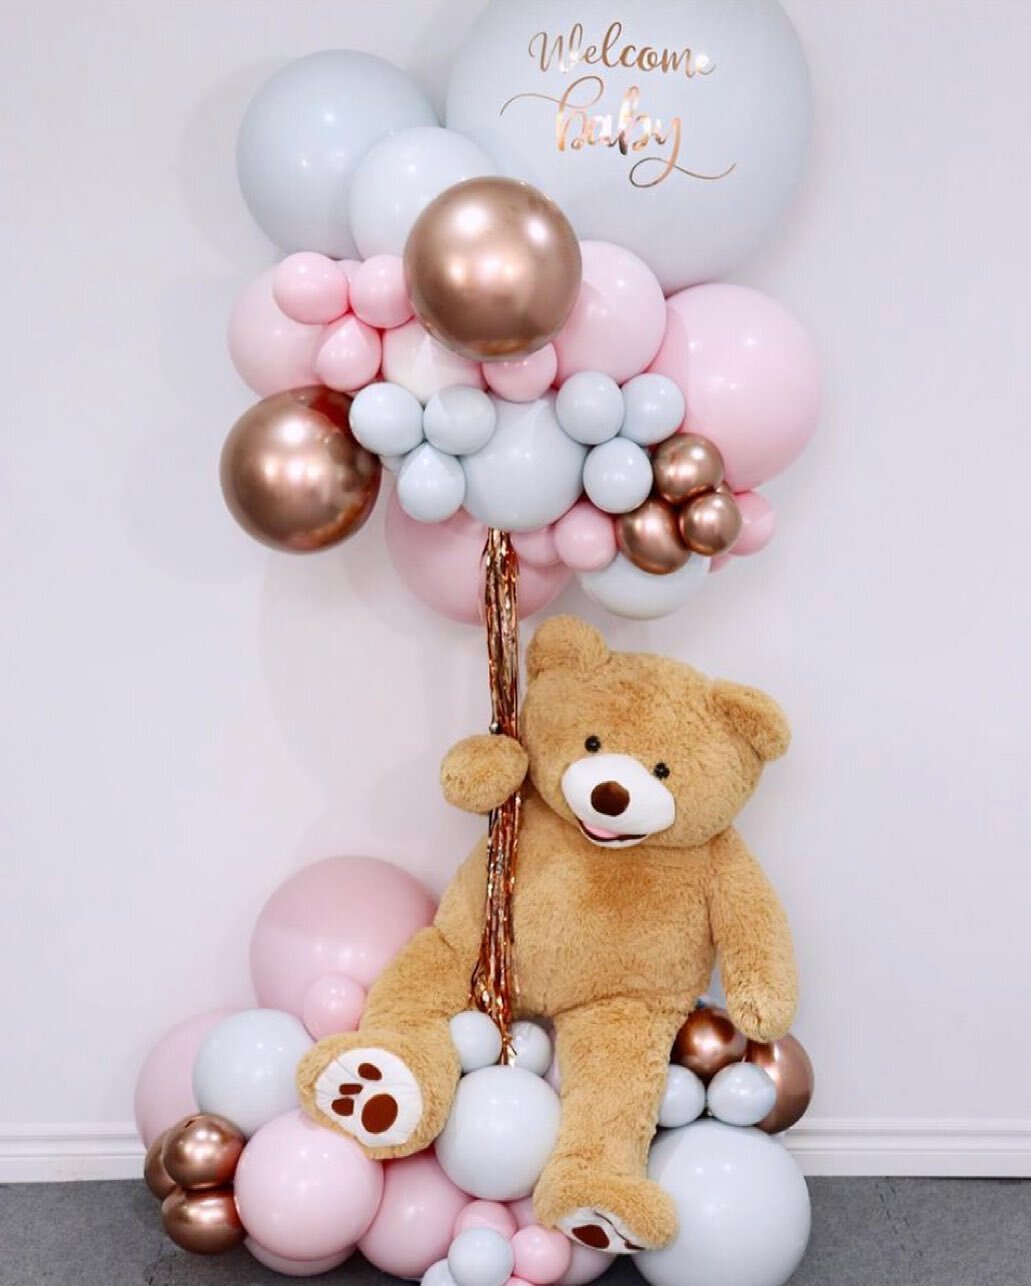 When I started this business, I knew I wanted to learn and expand what I already knew, perfect methods and evolve as a stylist. I want to offer cool balloon designs to my clients and this floating TEDDY is perfect for a birthday, welcome baby or baby